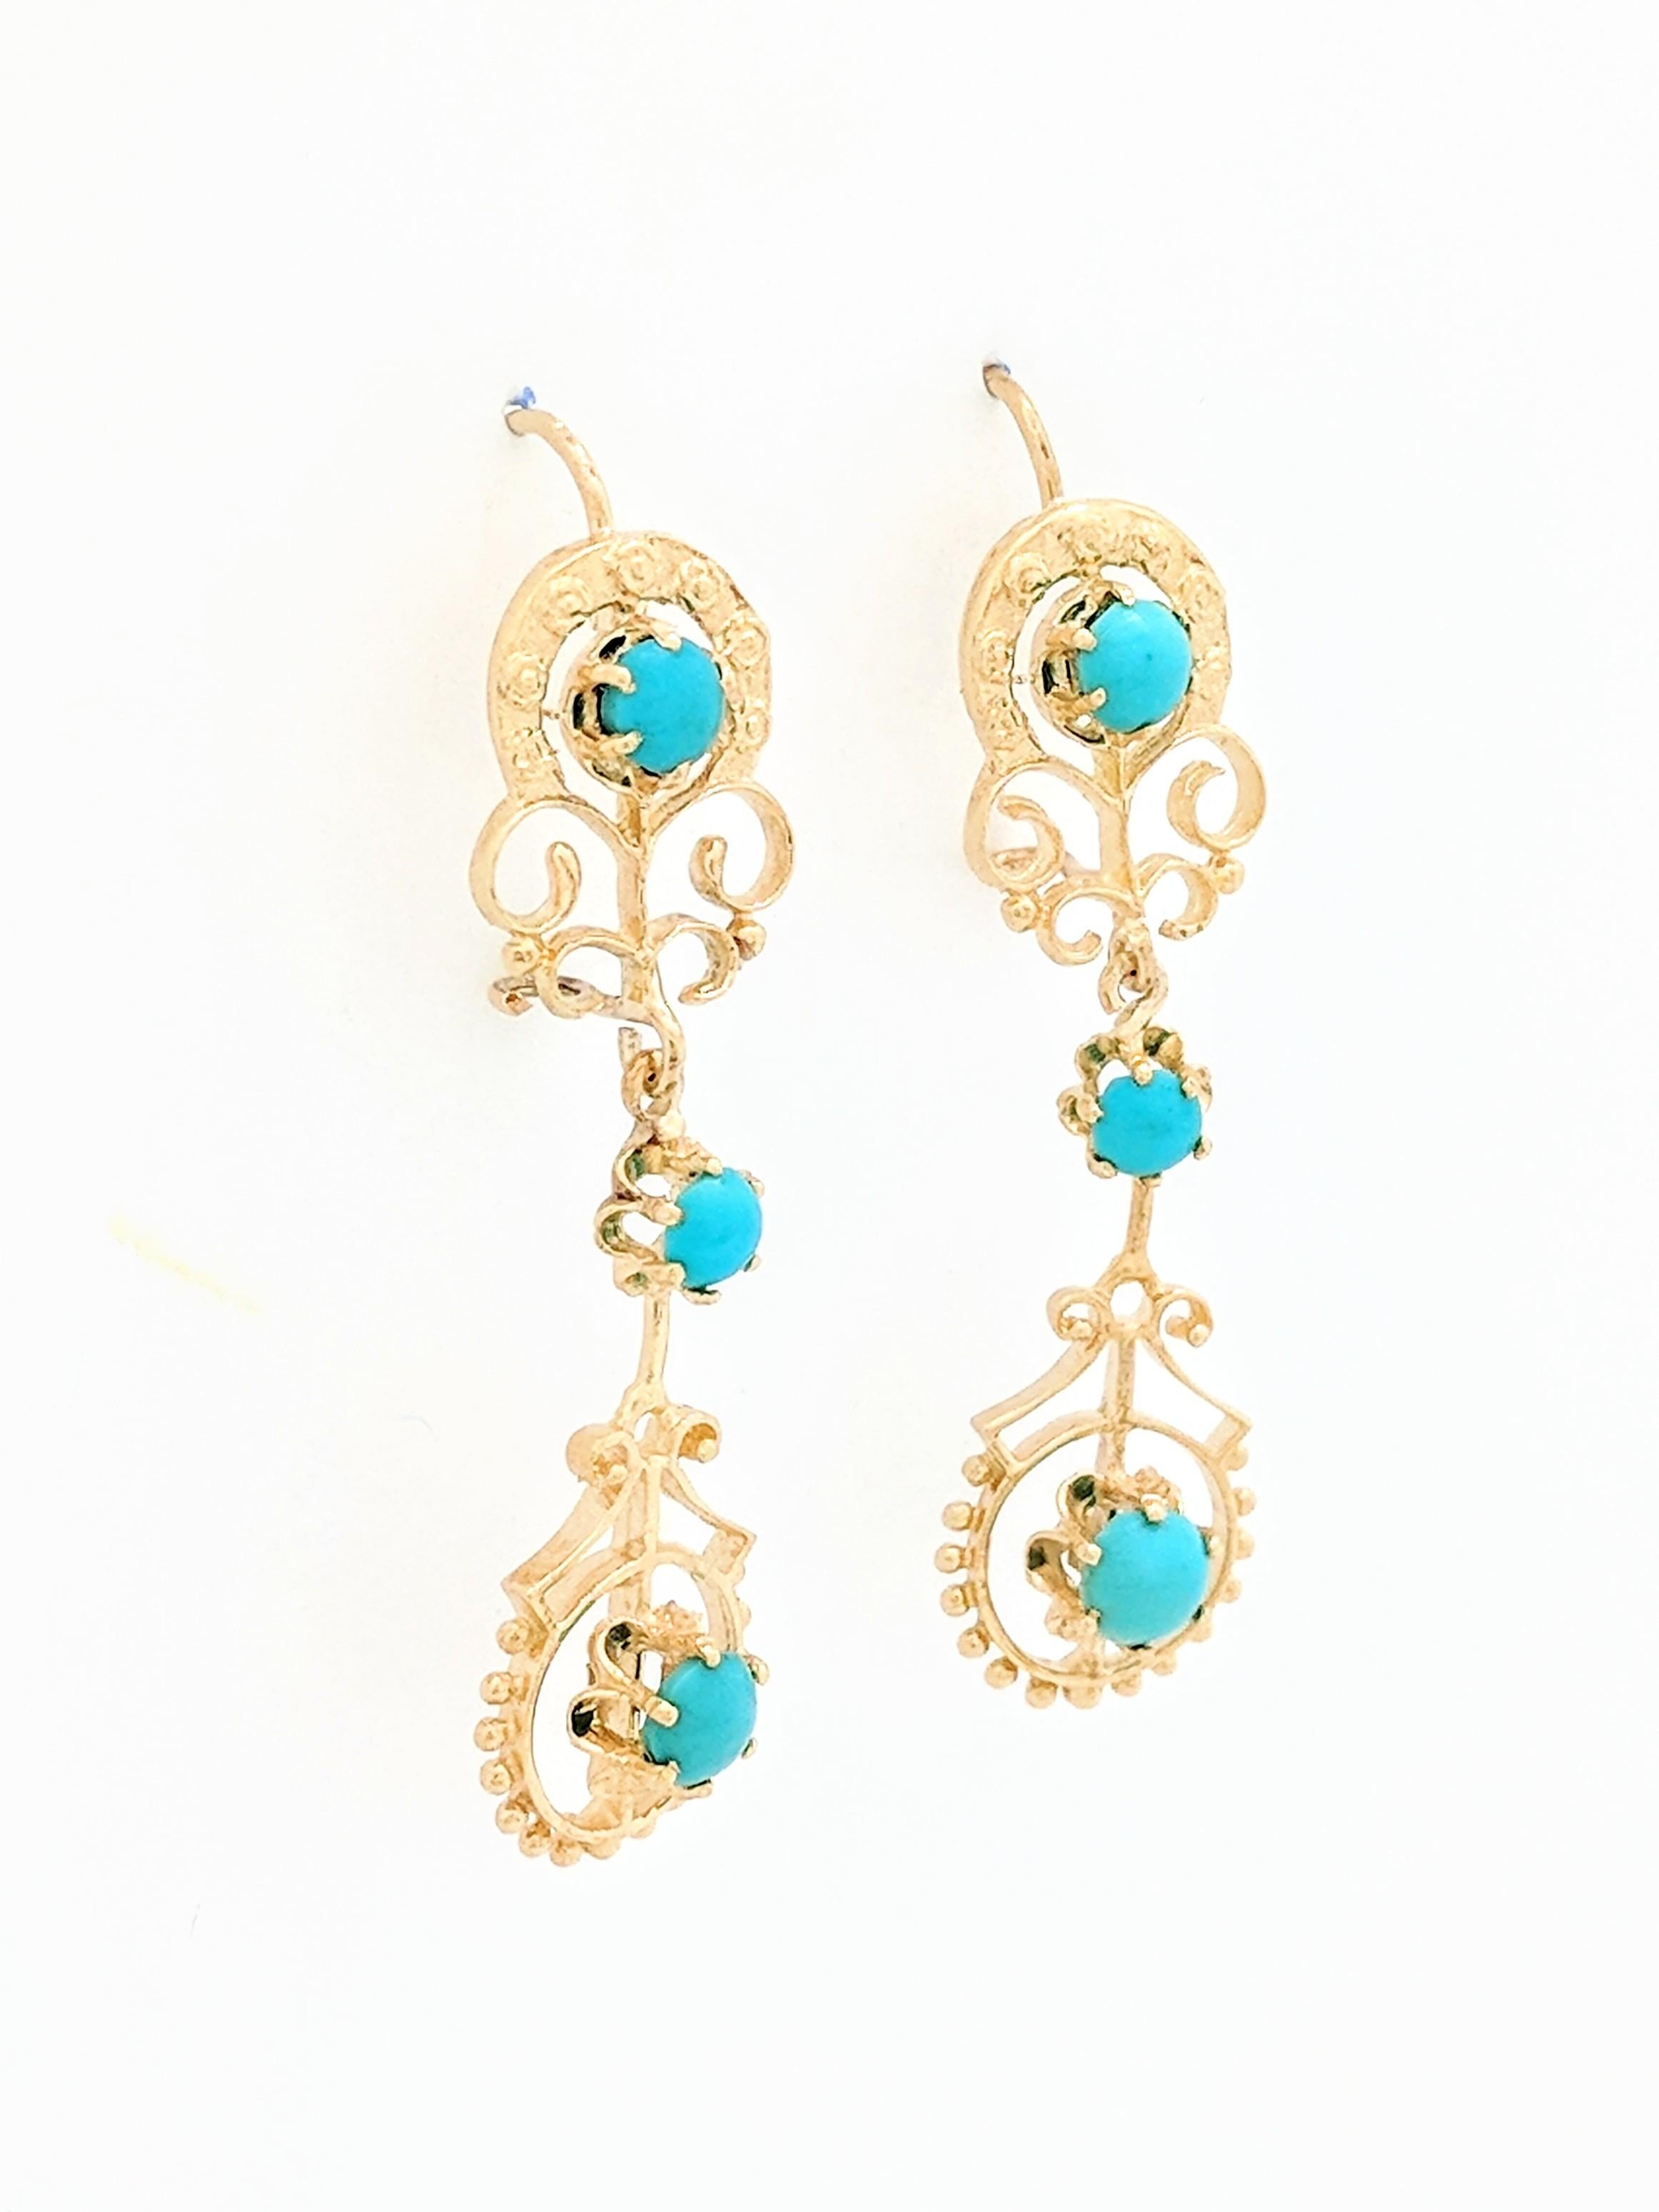 You are viewing a beautiful pair of turquoise dangle earrings. These earrings are crafted from 14k yellow gold and weighs 6.7 grams. Each earring features (3) cabochon turquoise gemstones. These earrings feature a kidney wire closure and are